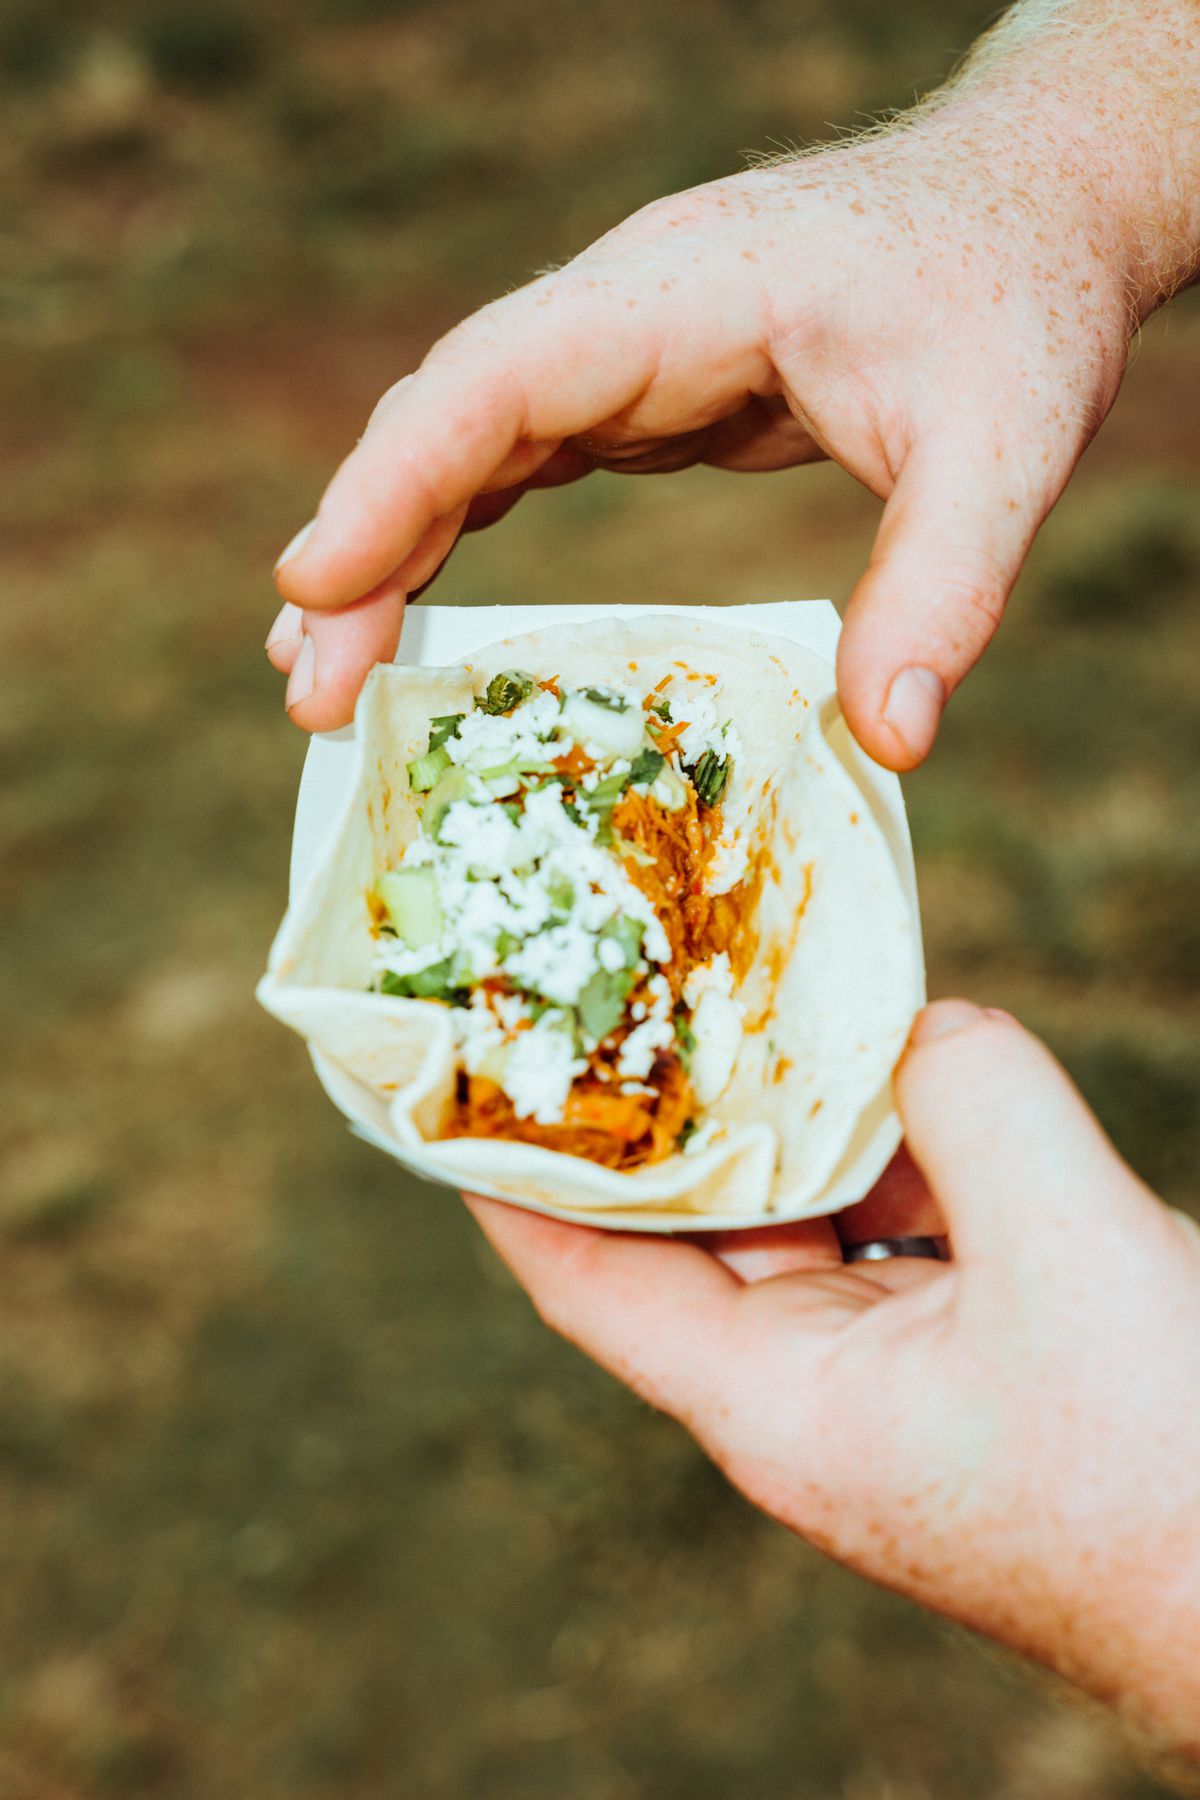 A hand holding up a taco in a tray.